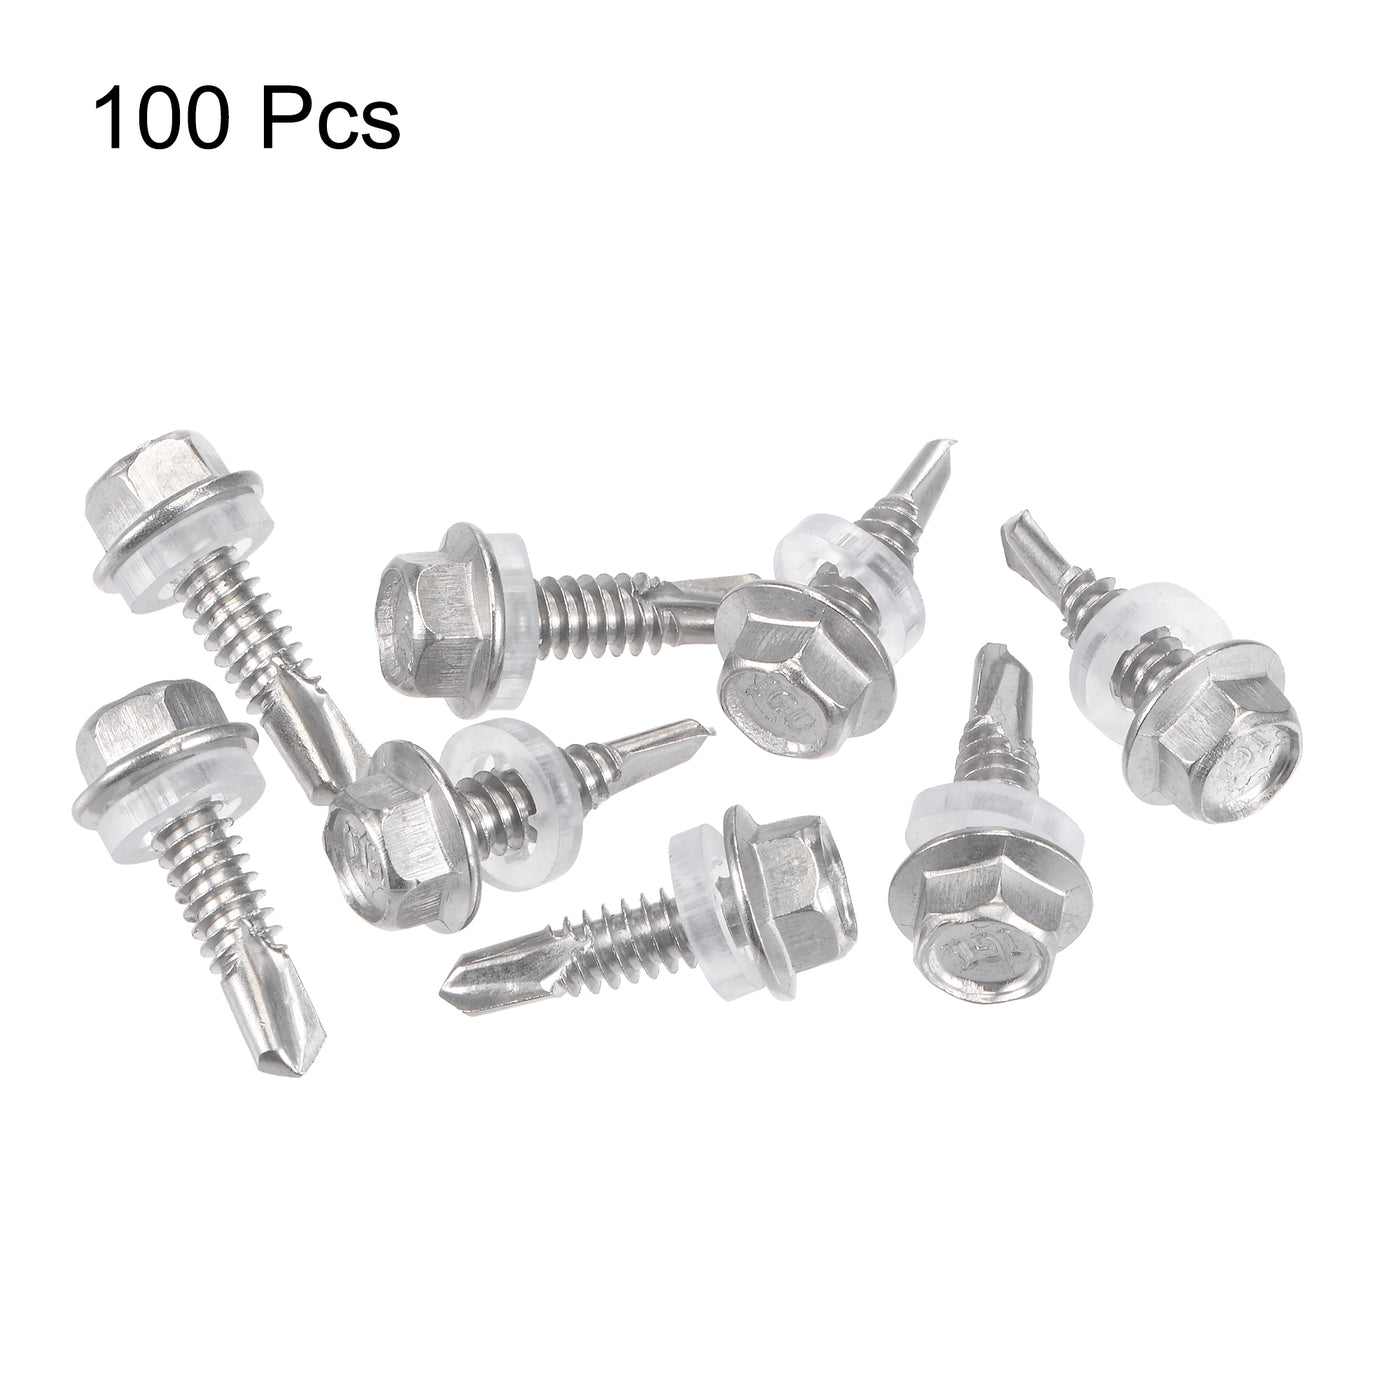 uxcell Uxcell #12 x 3/4" 410 Stainless Steel Hex Washer Head Self Drilling Screws 100pcs